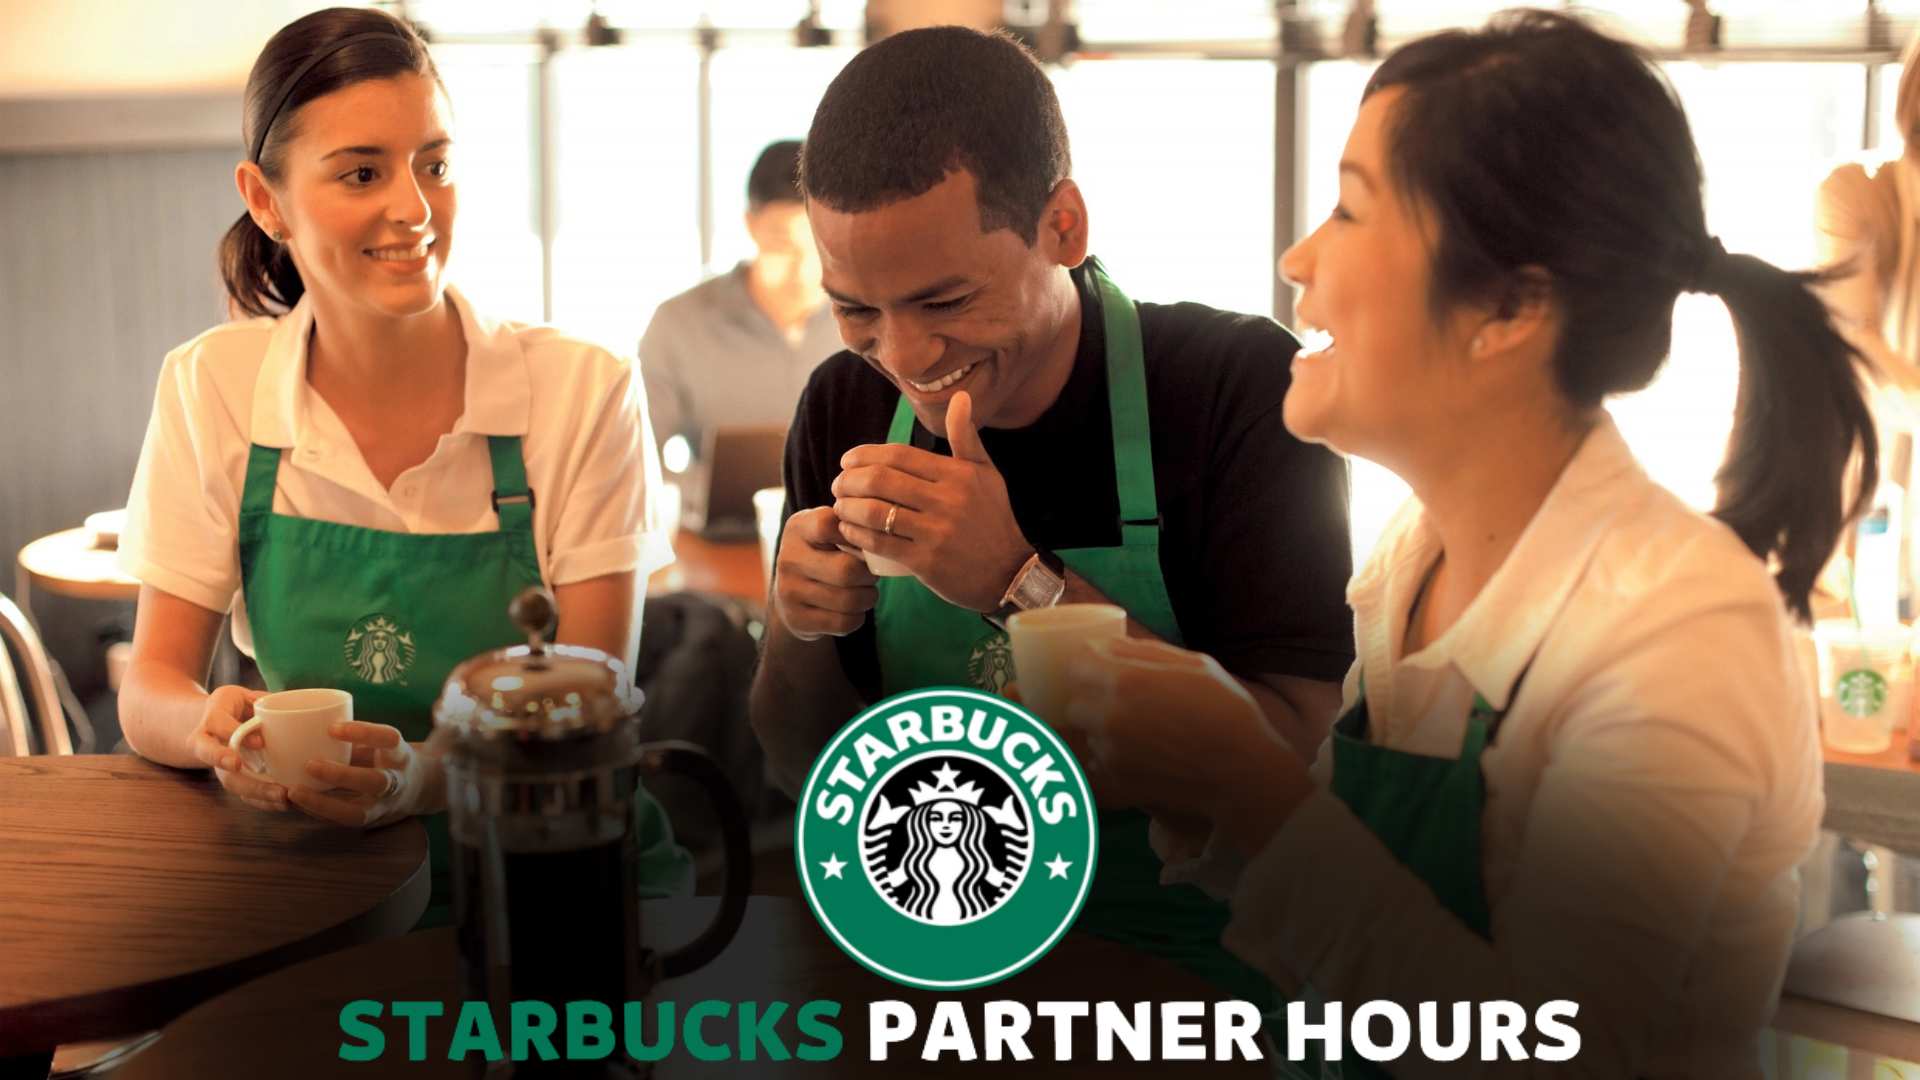 Are You a Starbucks Partner If You Served Starbucks Product